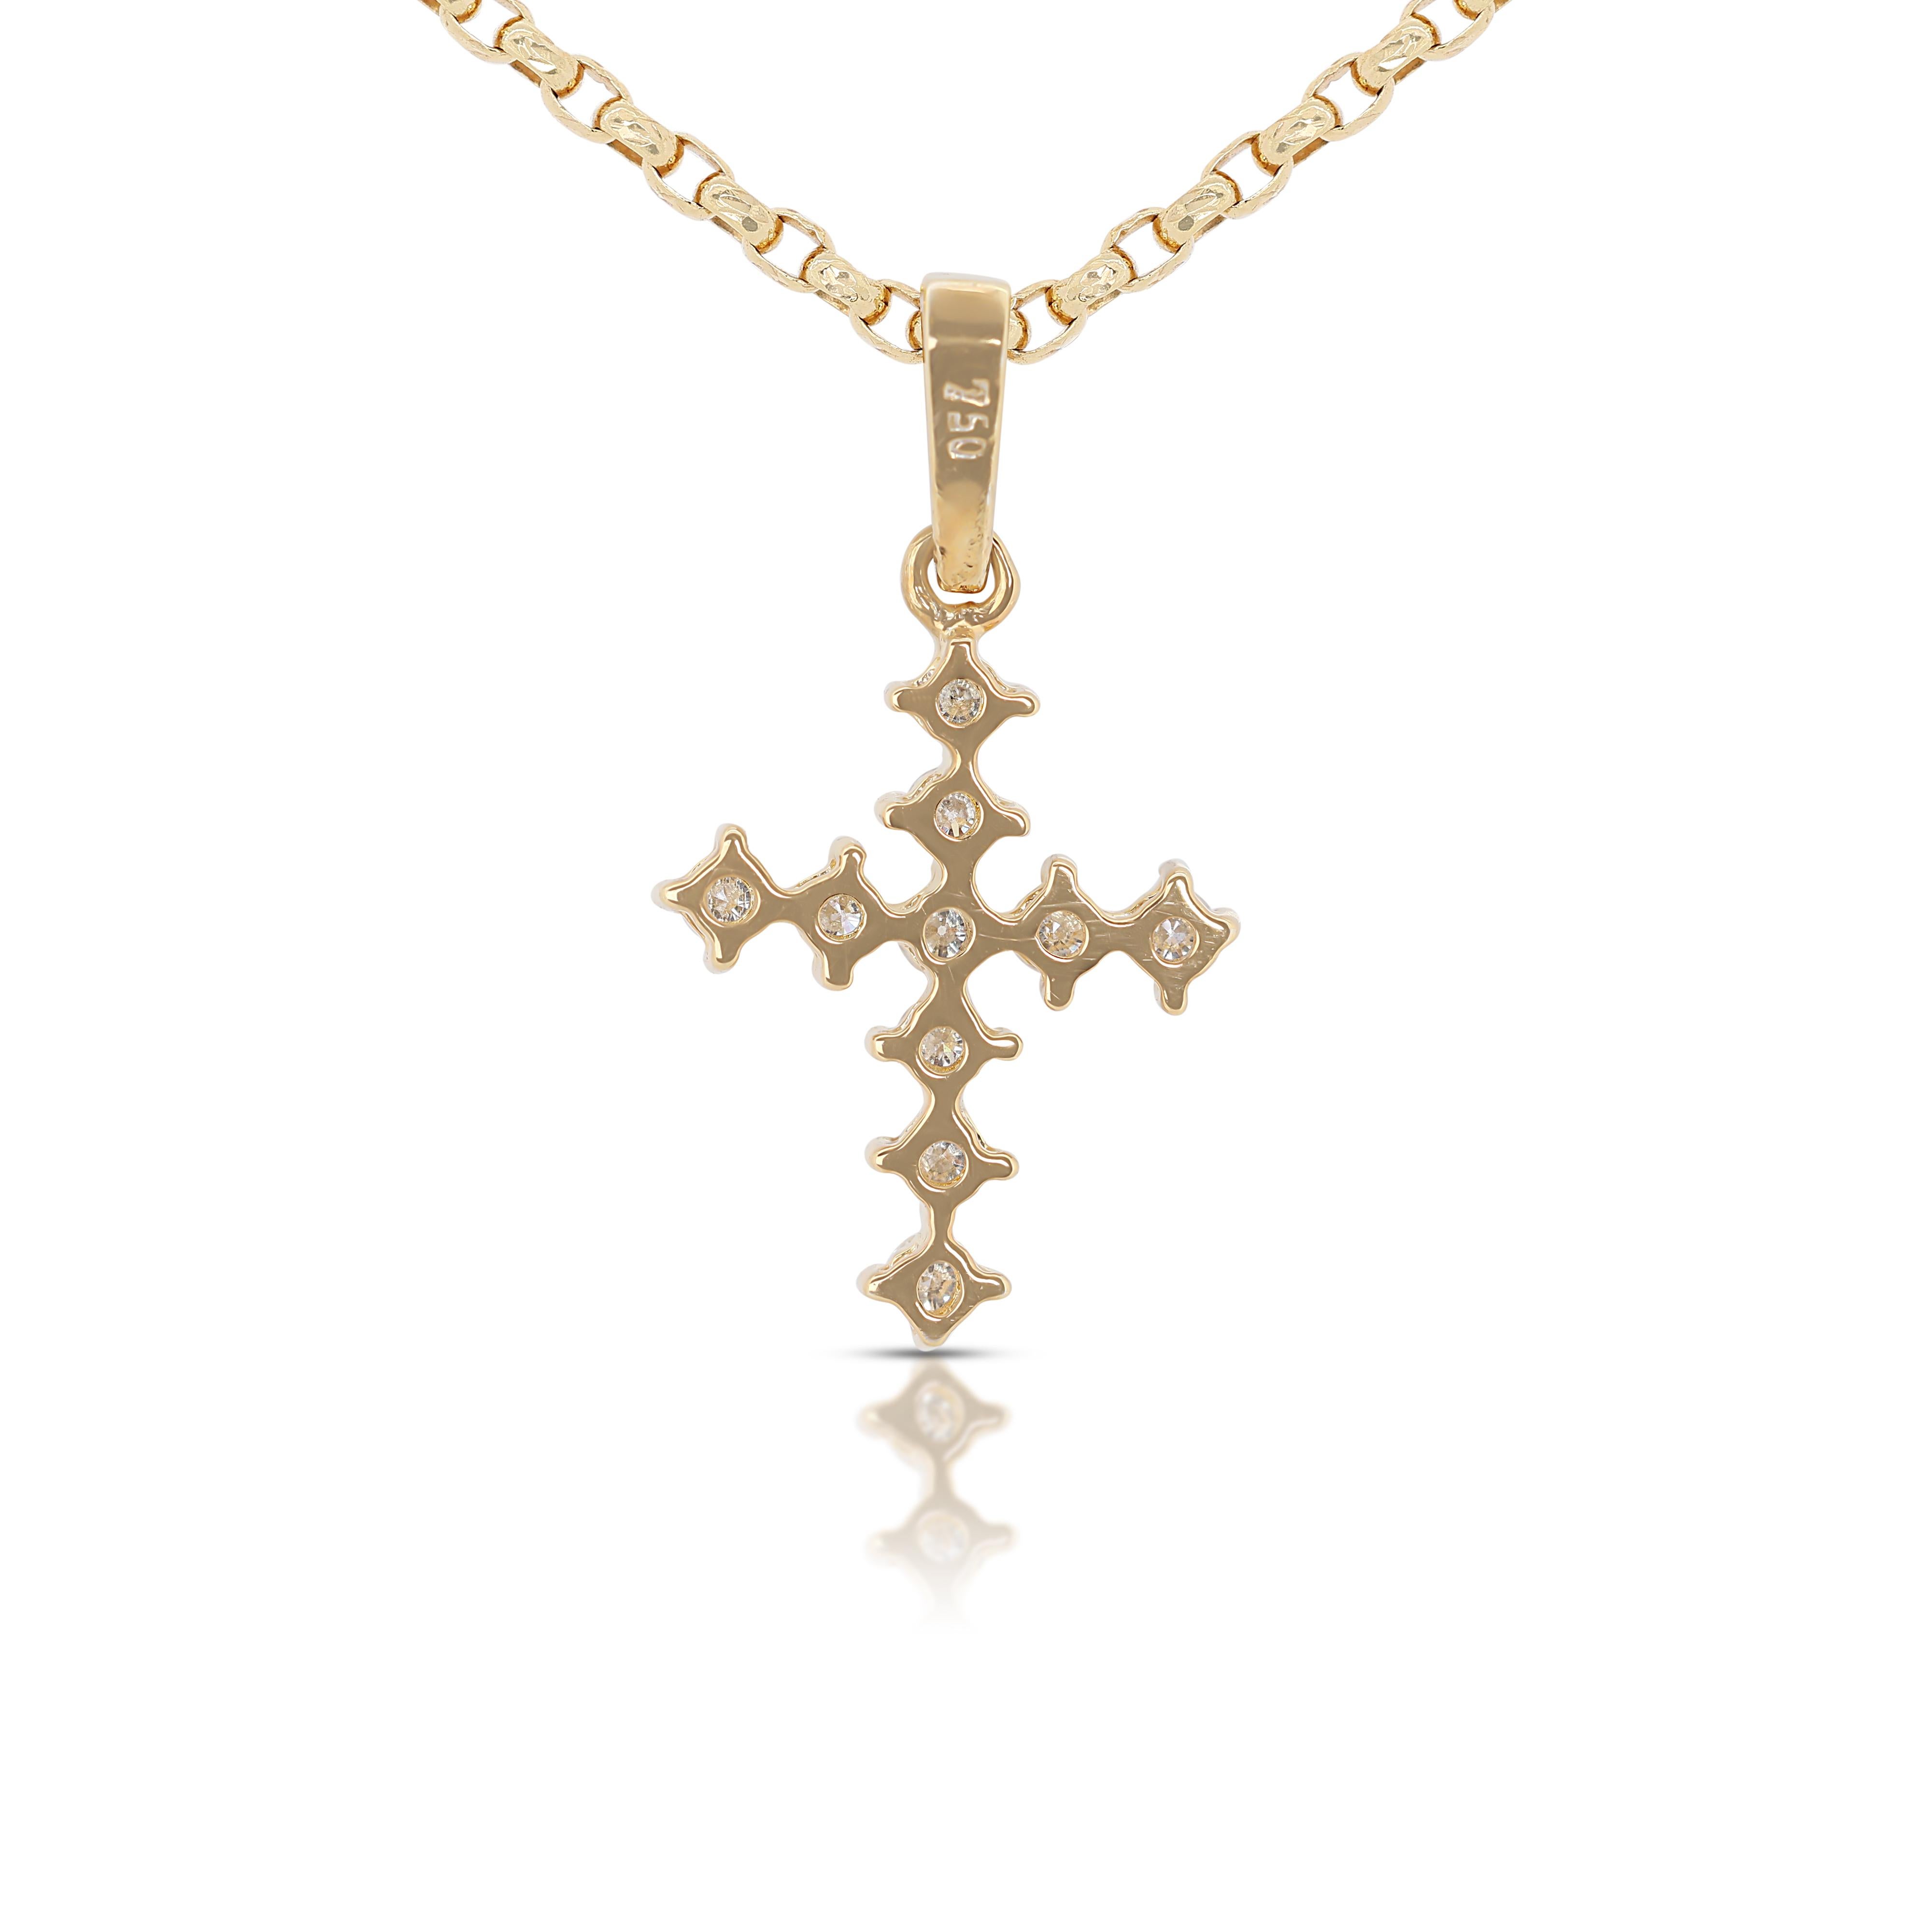 Timeless 0.15ct Diamonds Cruciform Pendant in 18K Yellow Gold-Chain not Included For Sale 1